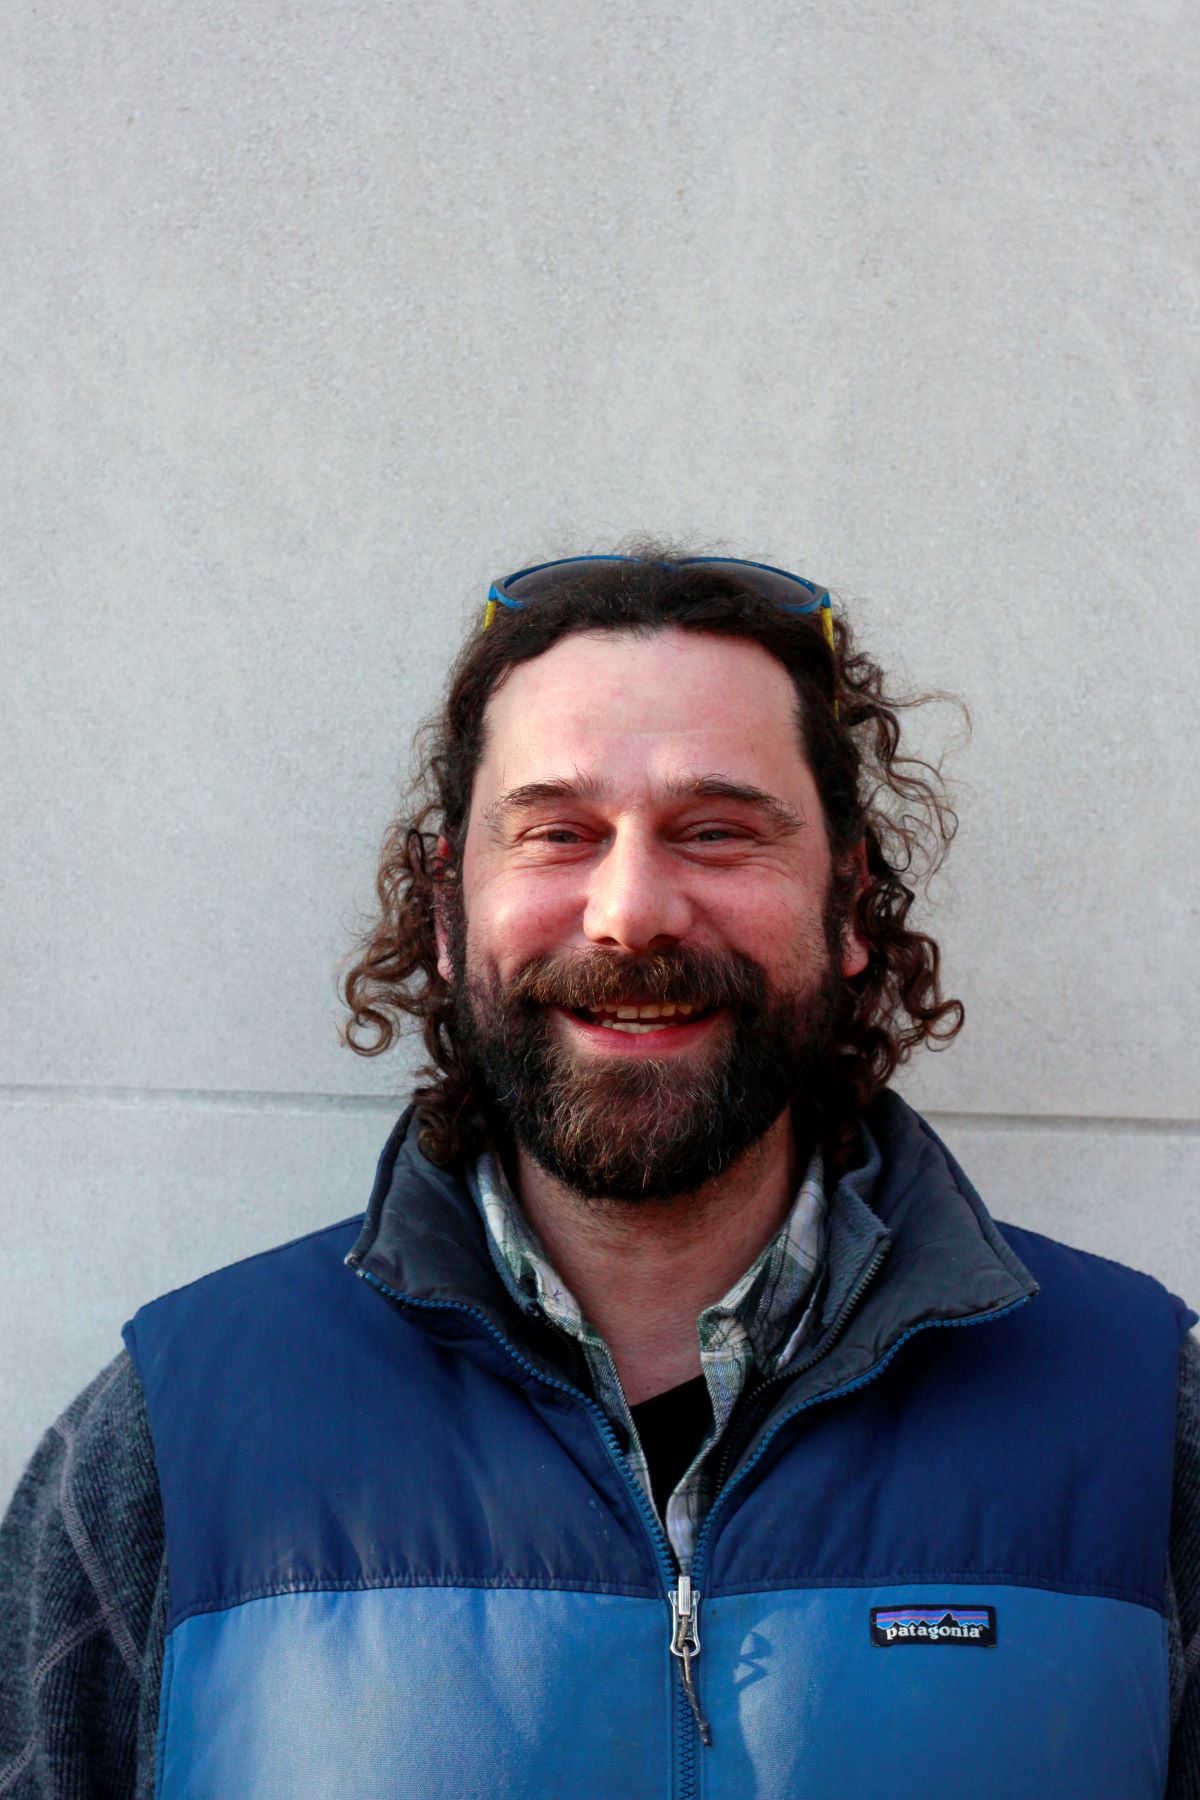 A smiling person with curly hair and a beard stands before a gray wall, wearing sunglasses atop their head and a two-toned blue vest.